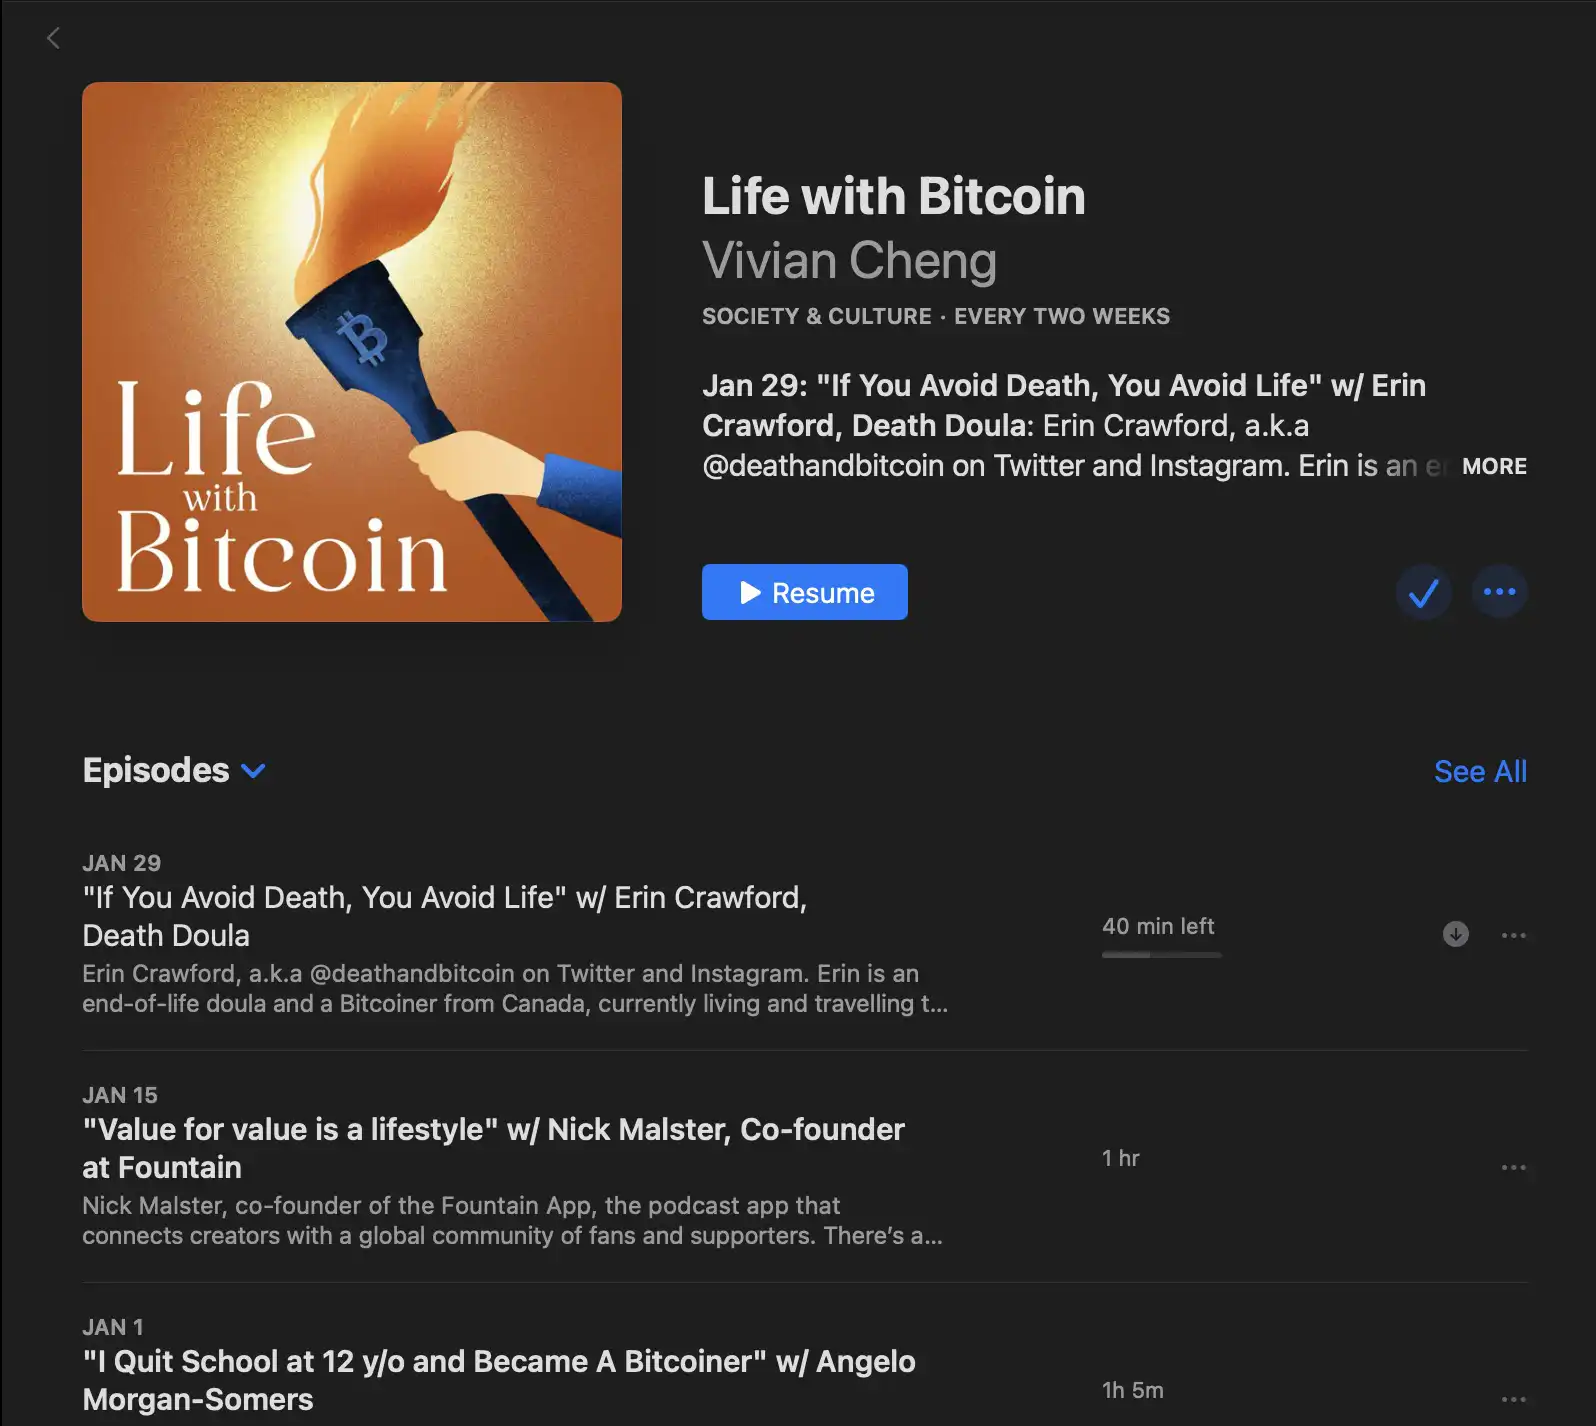 Life With Bitcoin by Vivian Cheng Podcast